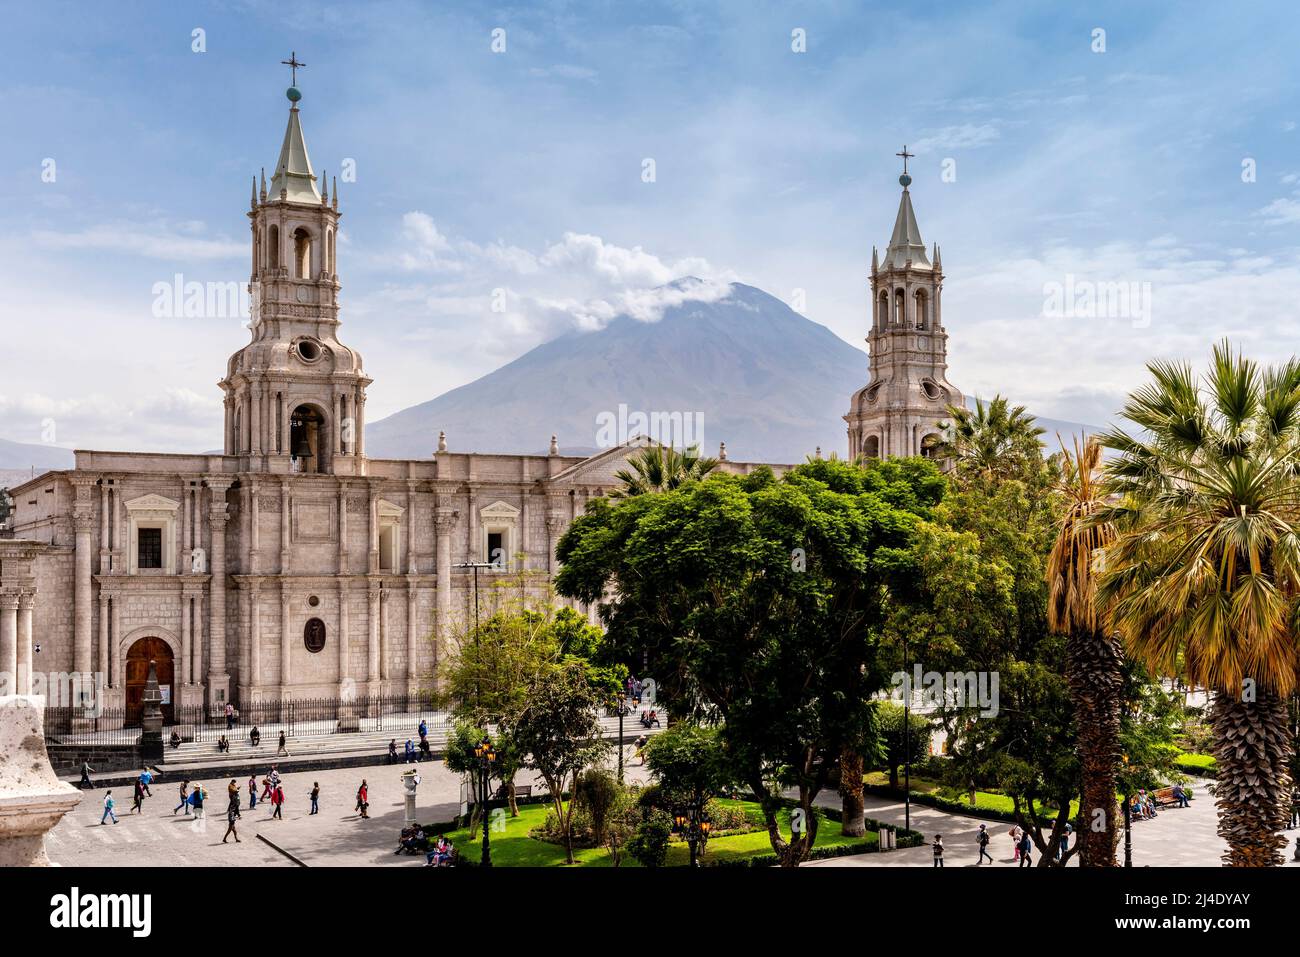 The Basilica Cathedral of Arequipa With A View Of The El Misti Volcano In The Backround, Arequipa, Peru. Stock Photo